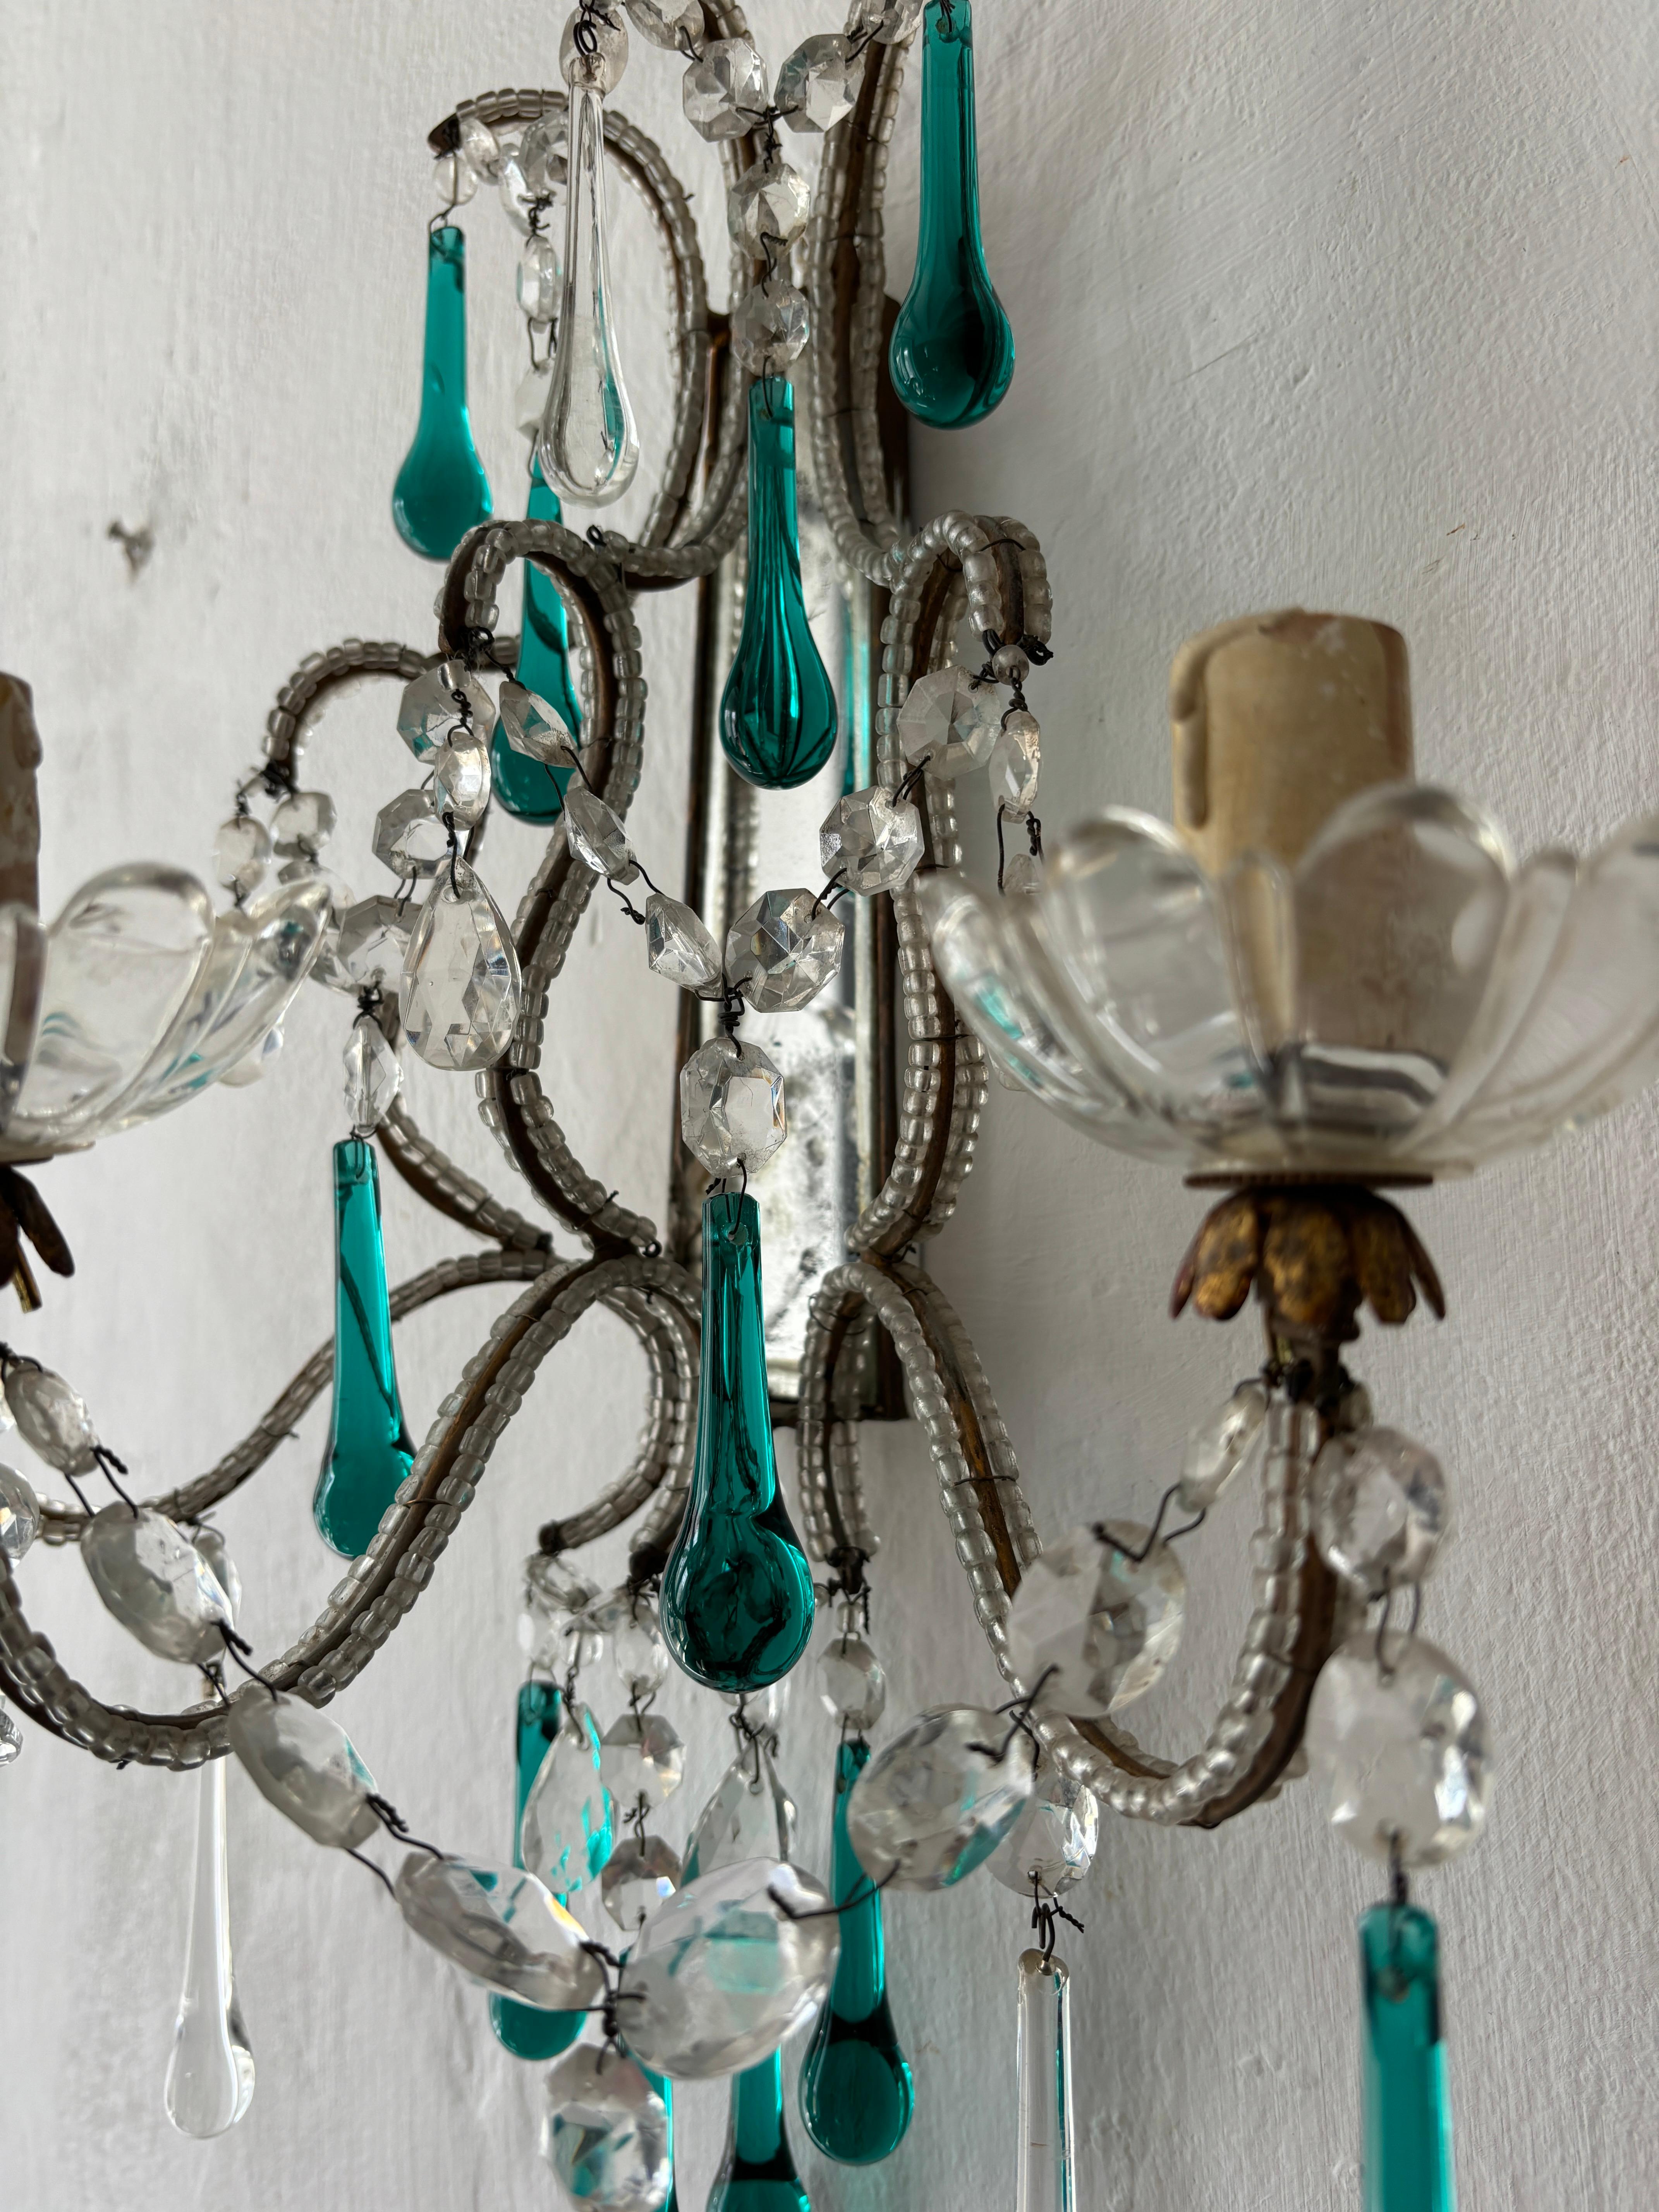 c 1900 French Beaded Extremely Rare Sea foam Green Murano Drops Mirrors Sconces For Sale 3